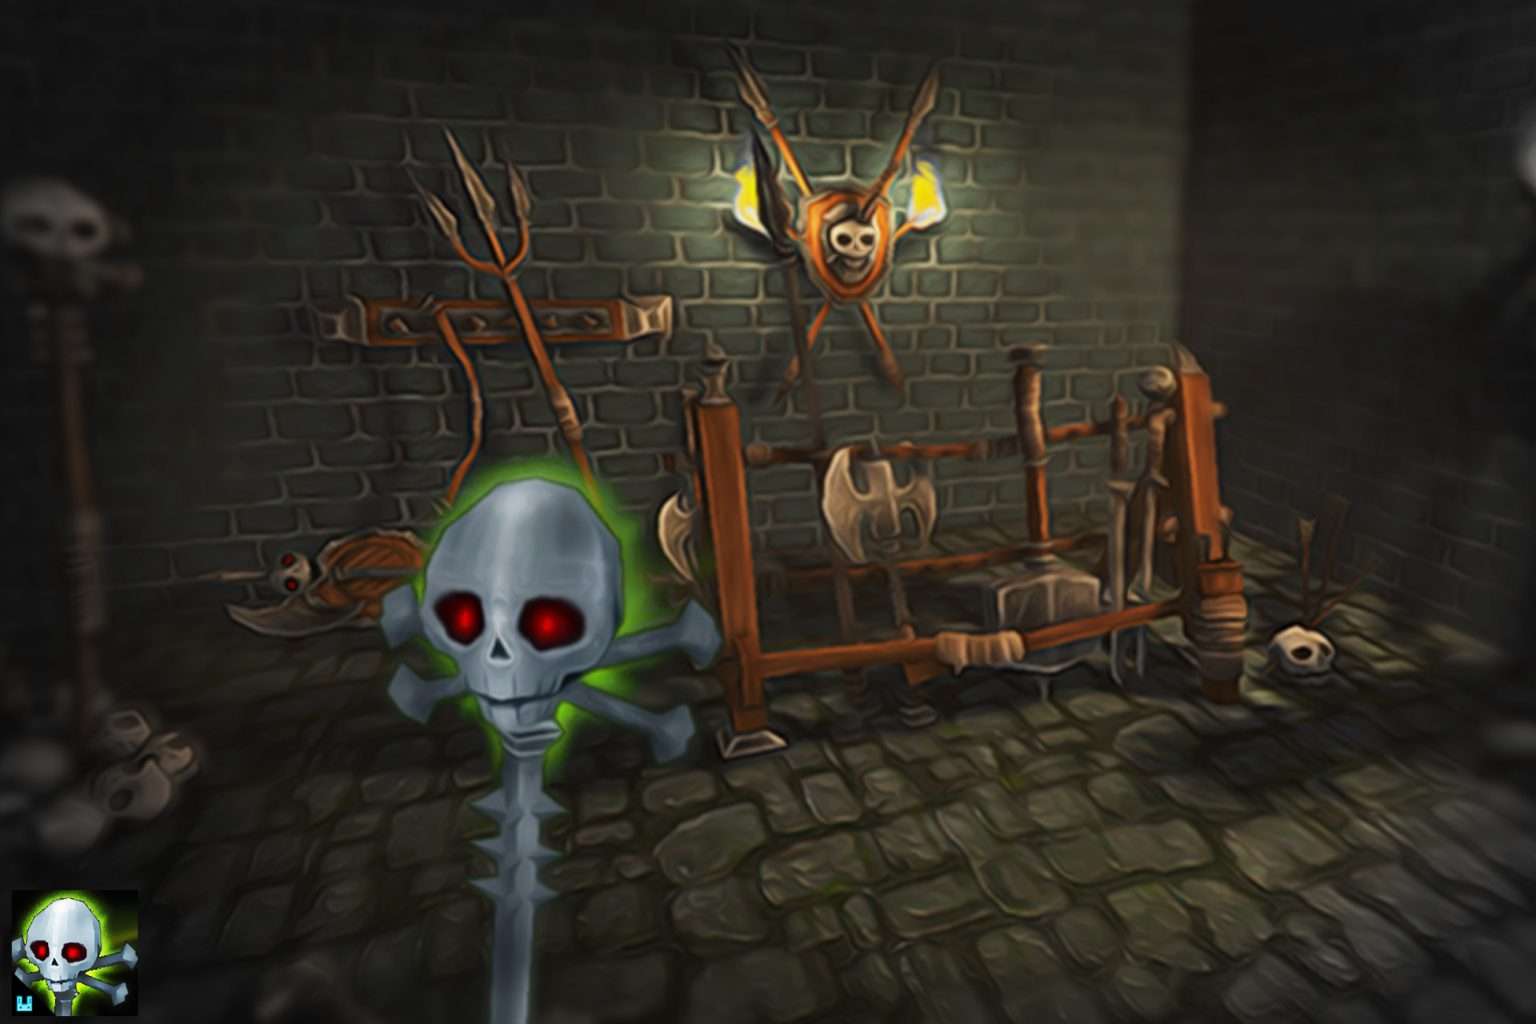 dungeon-props-free-download-unity-asset-collection